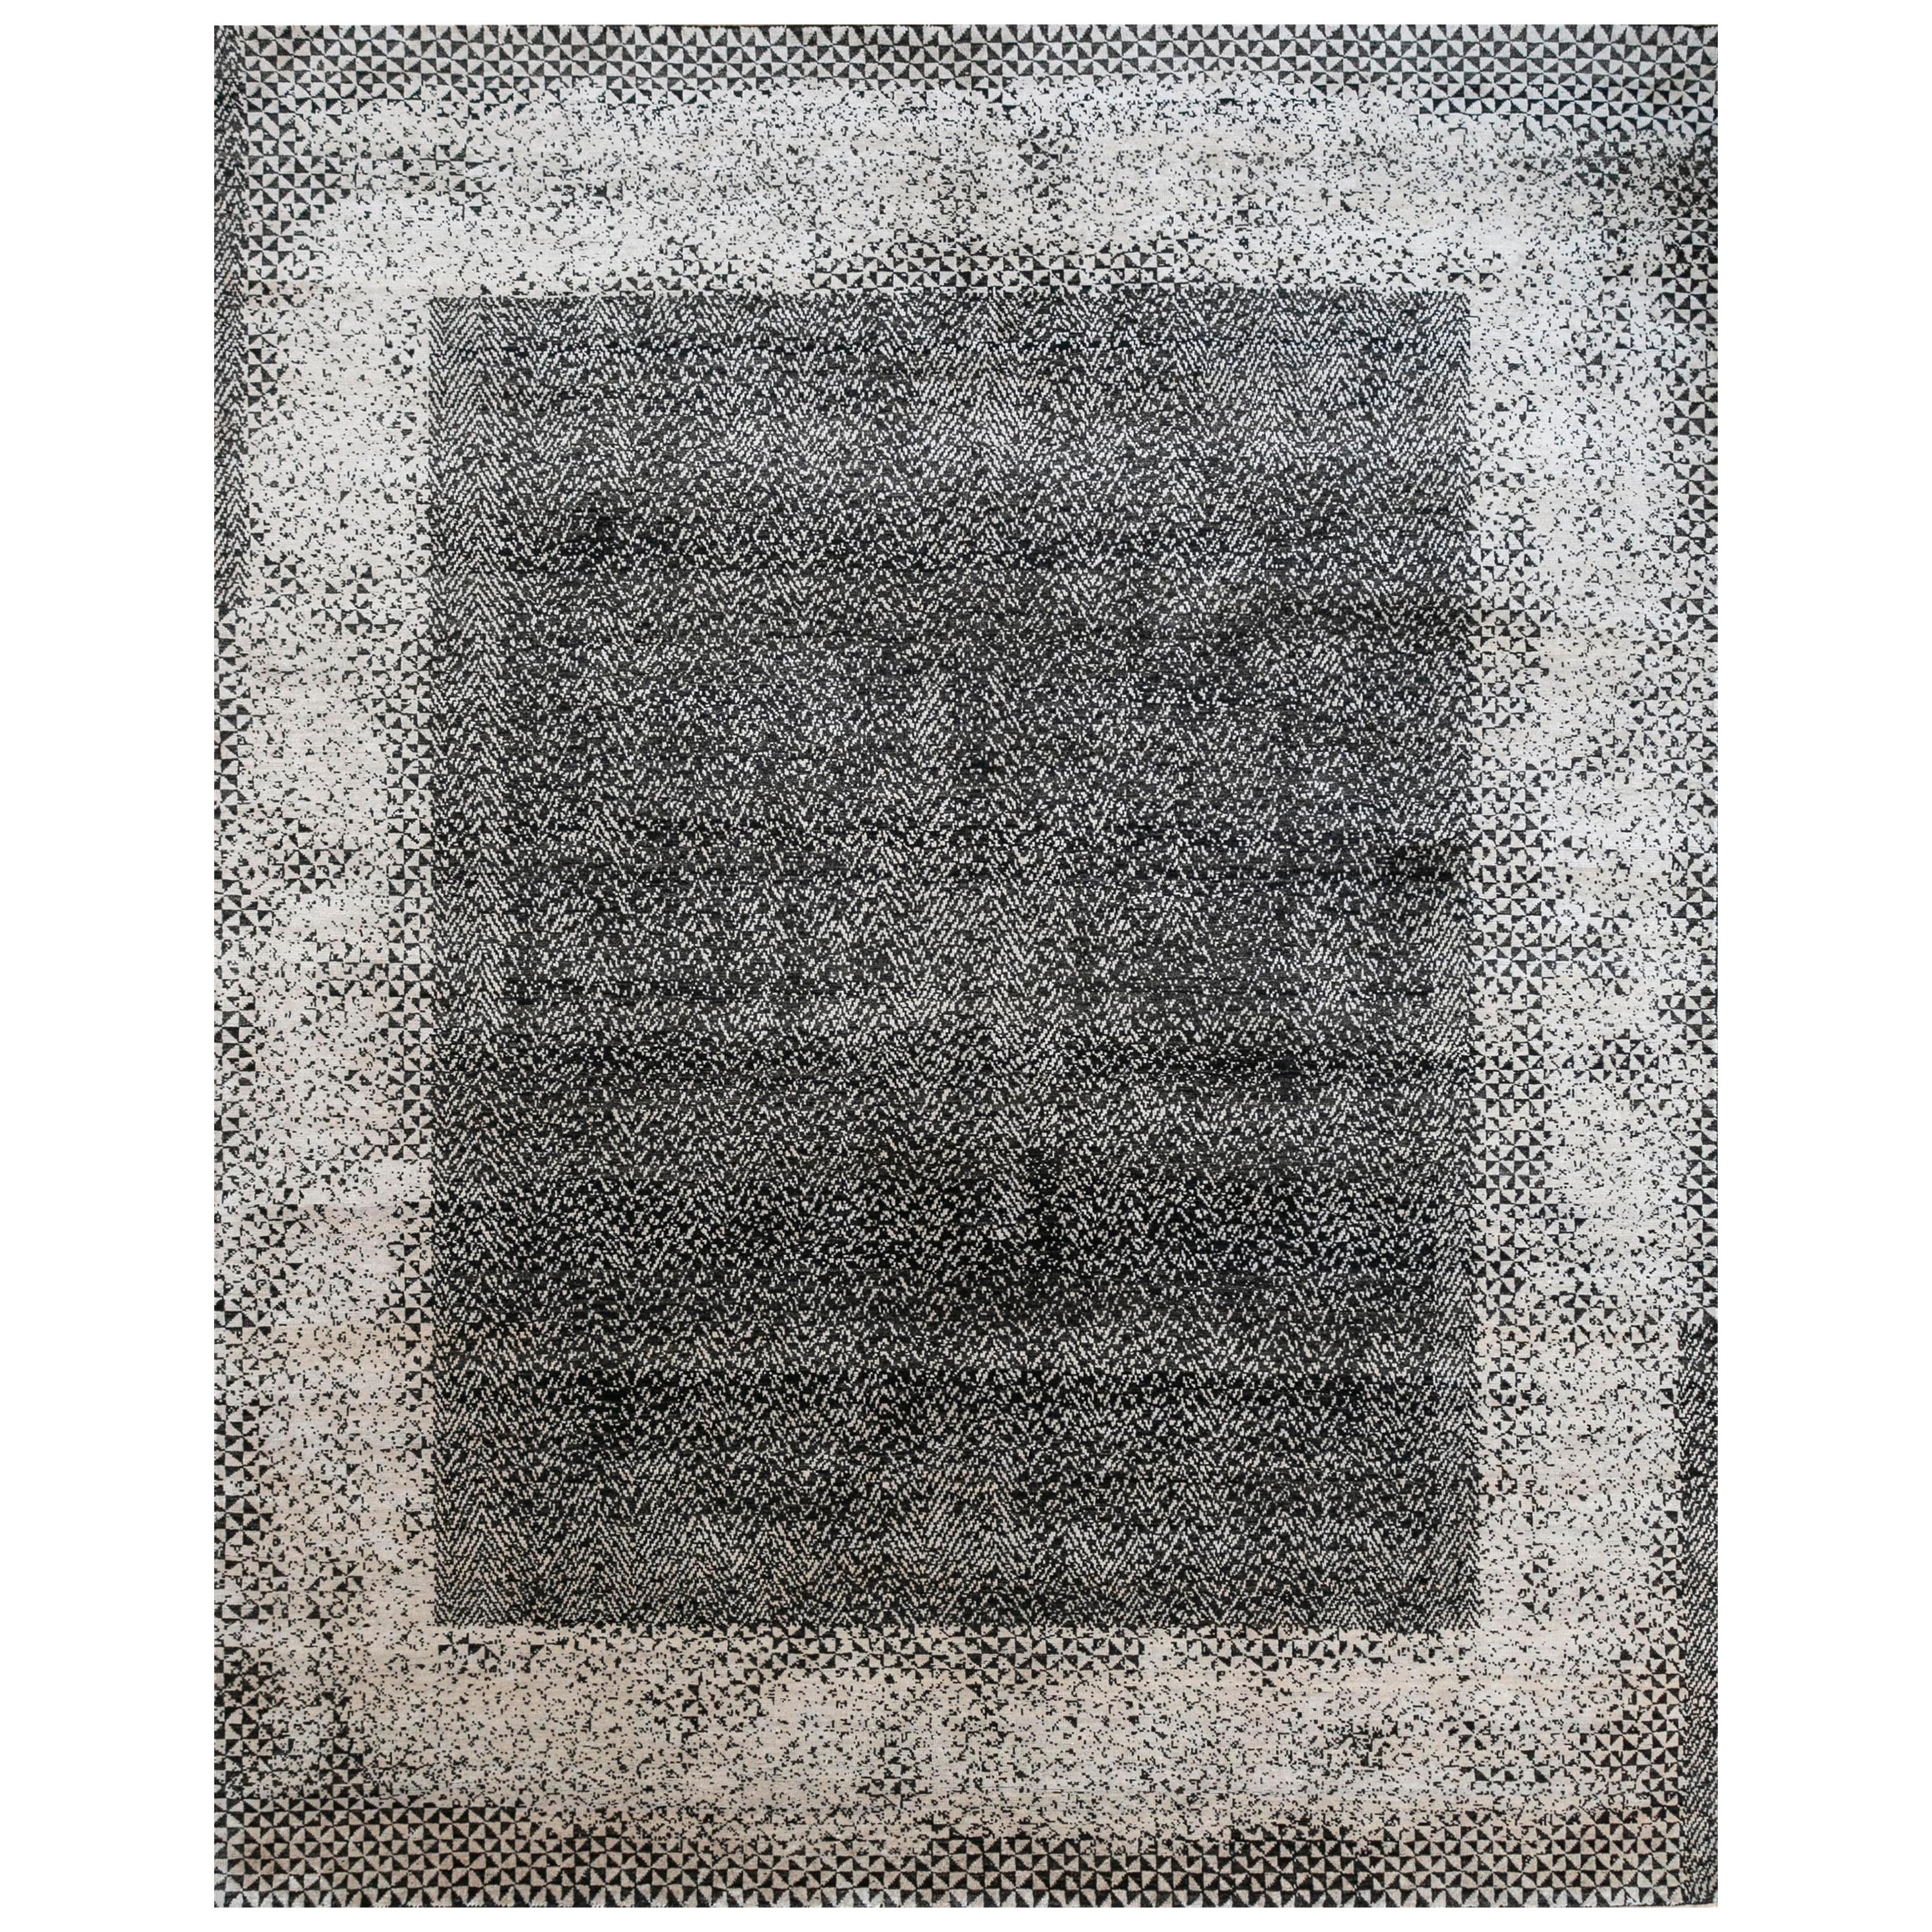 Serenity Symphony White & Ebony 240X300 cm Handknotted Rug For Sale